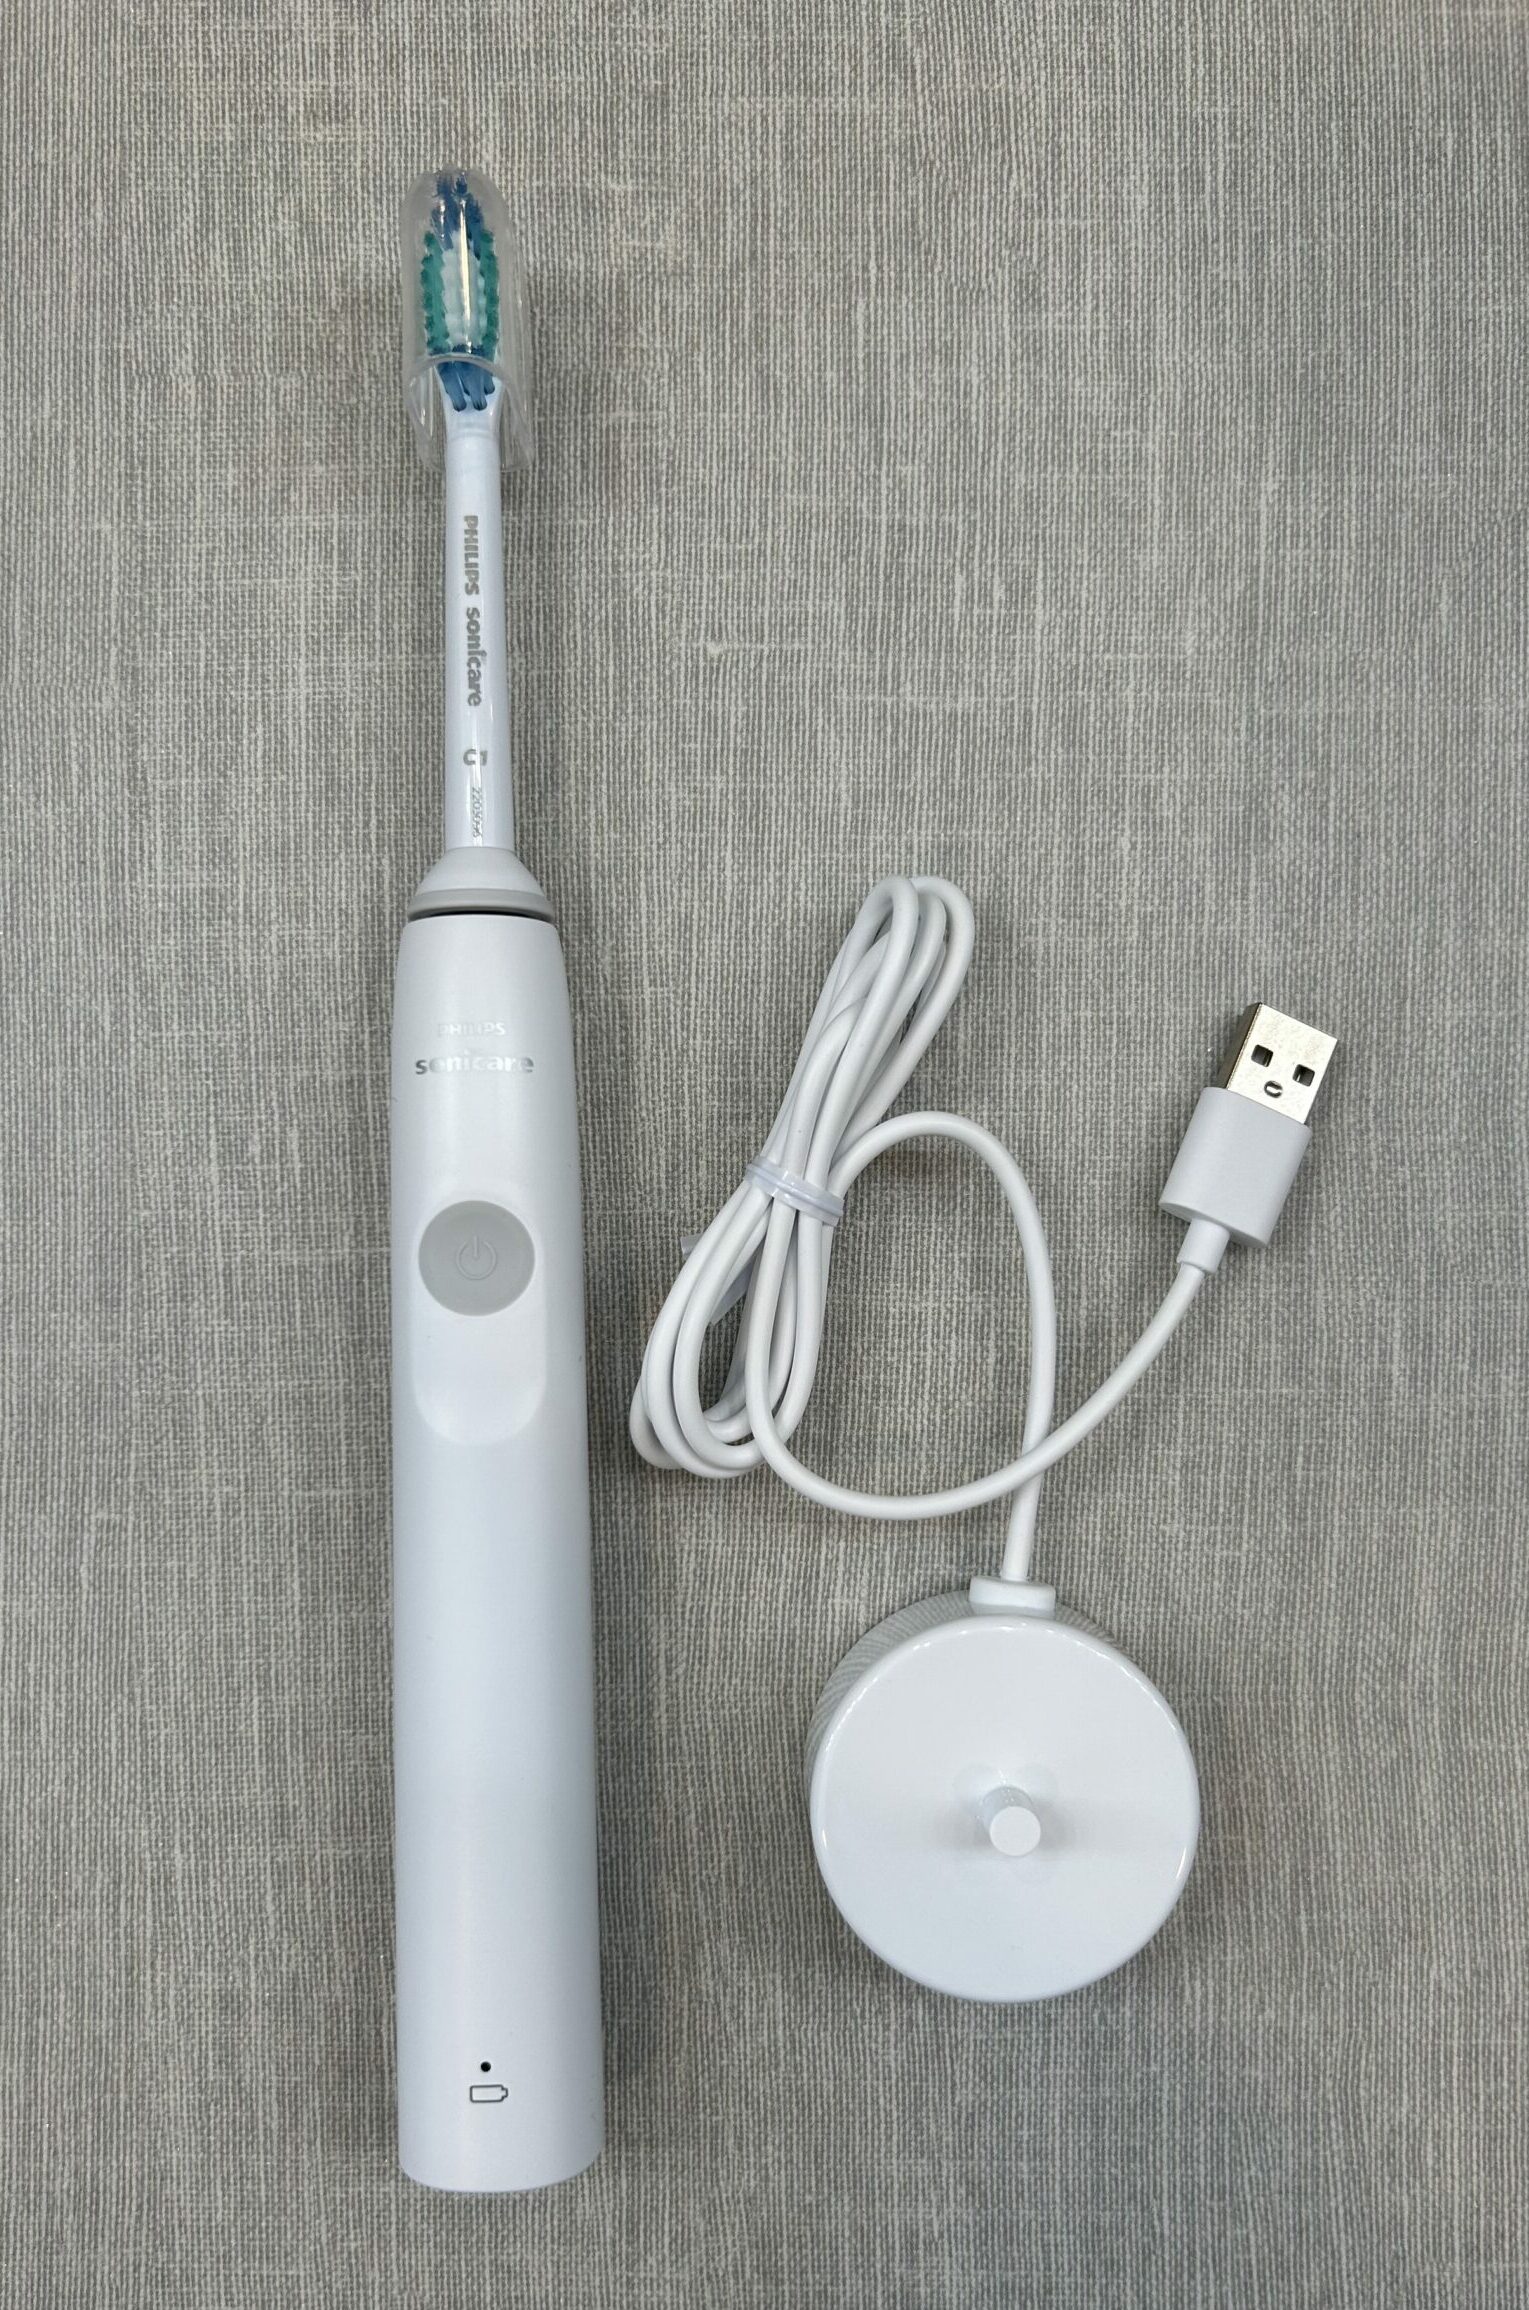 Philips Sonicare DailyClean 1100 Electric Toothbrush | My Dental Advocate